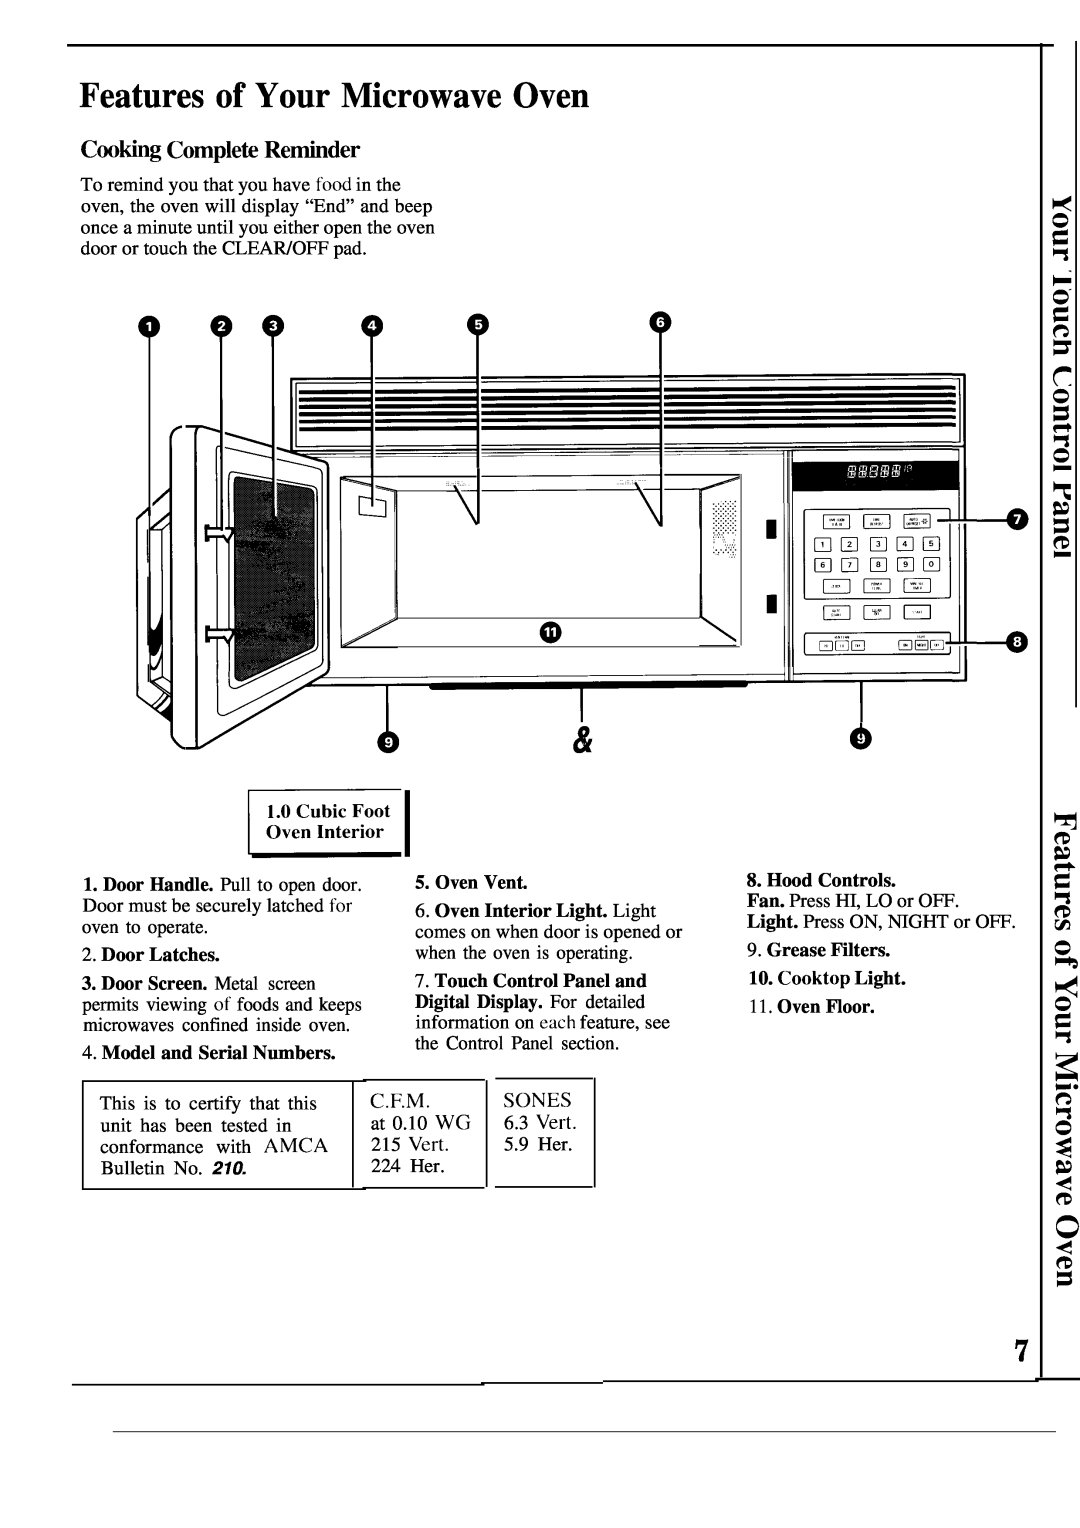 GE 164 D2588P063, JVM132J Features of Your Microwave Oven, Coohg Completi Retider, Door Latches, Model and Serial Numbers 